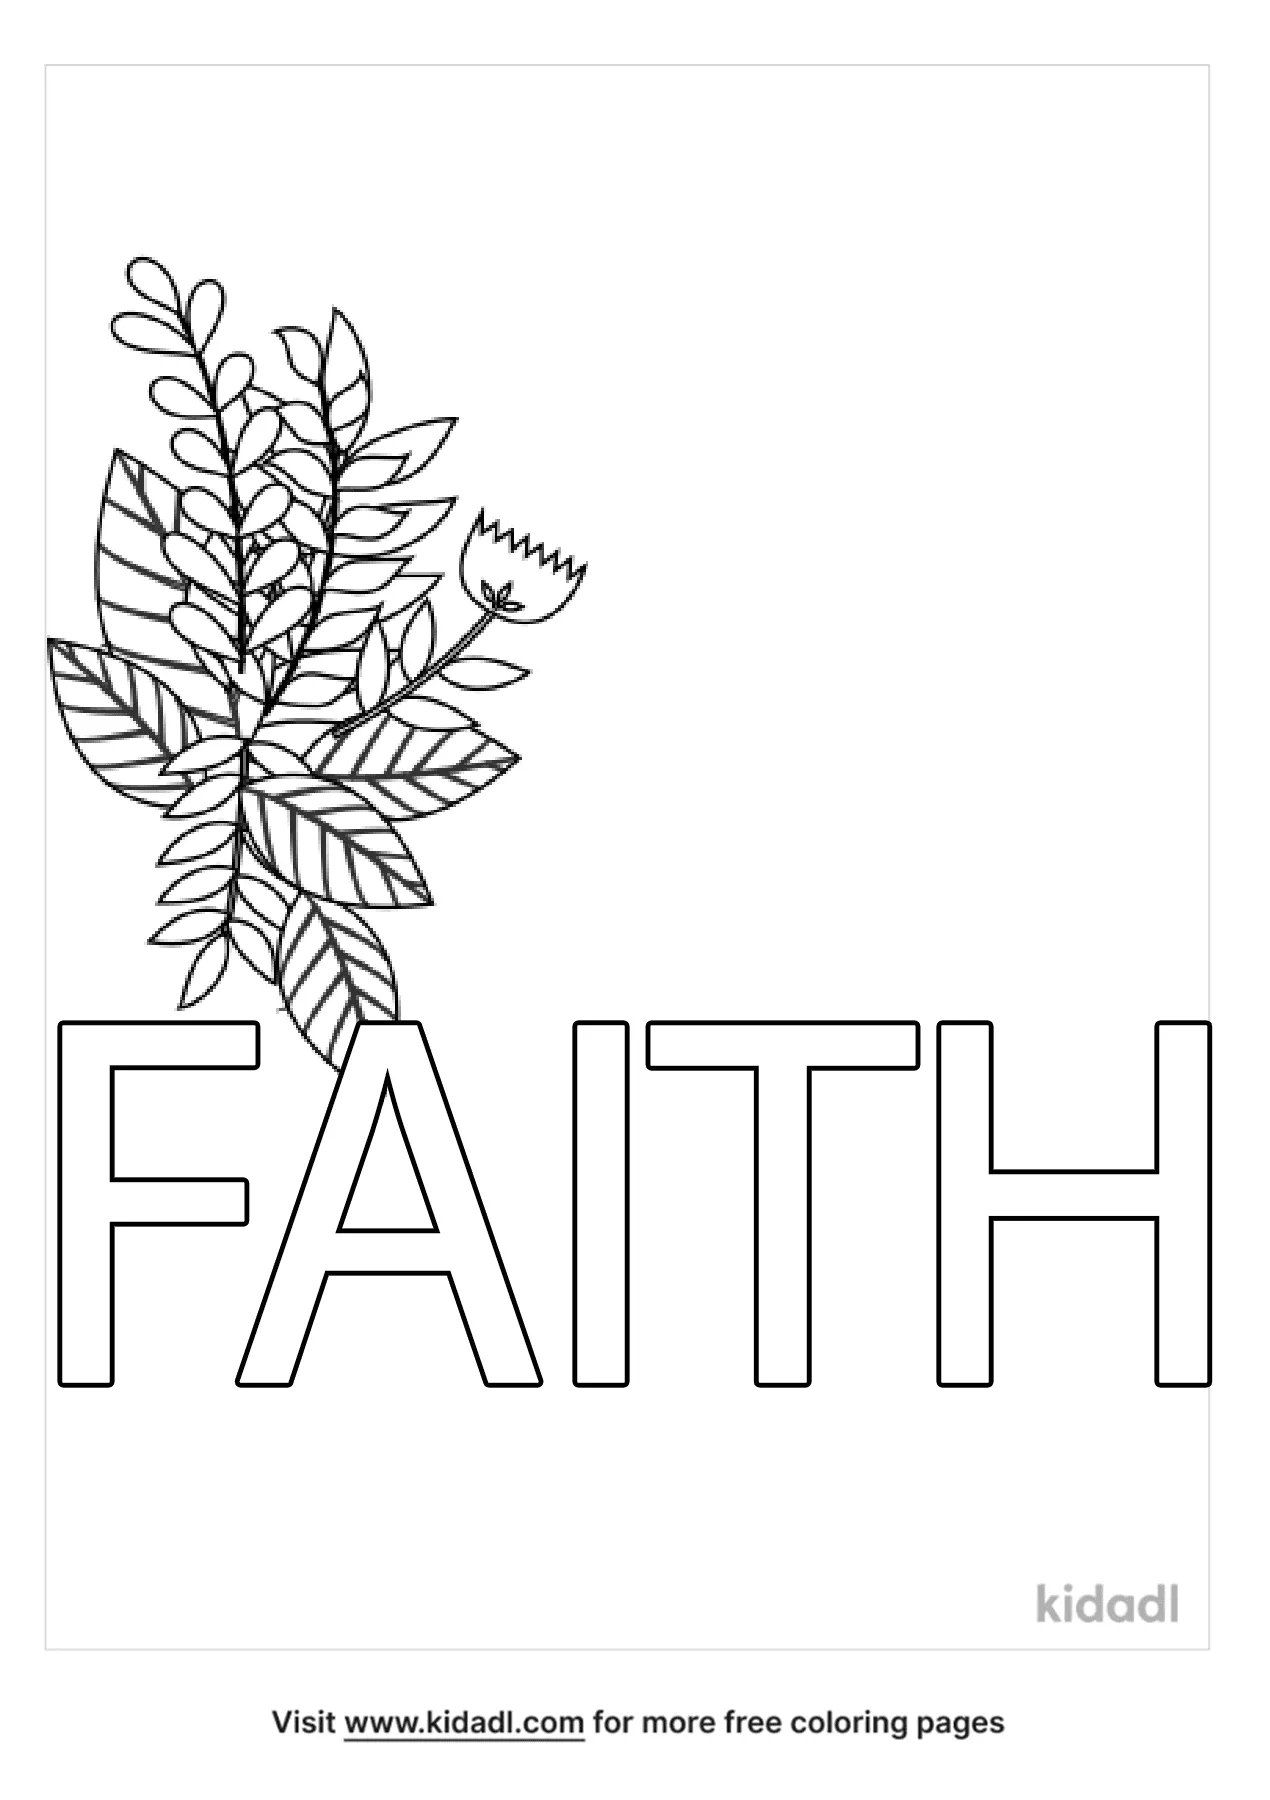 Free Printable Faith Coloring Pages - Visit the free download page here